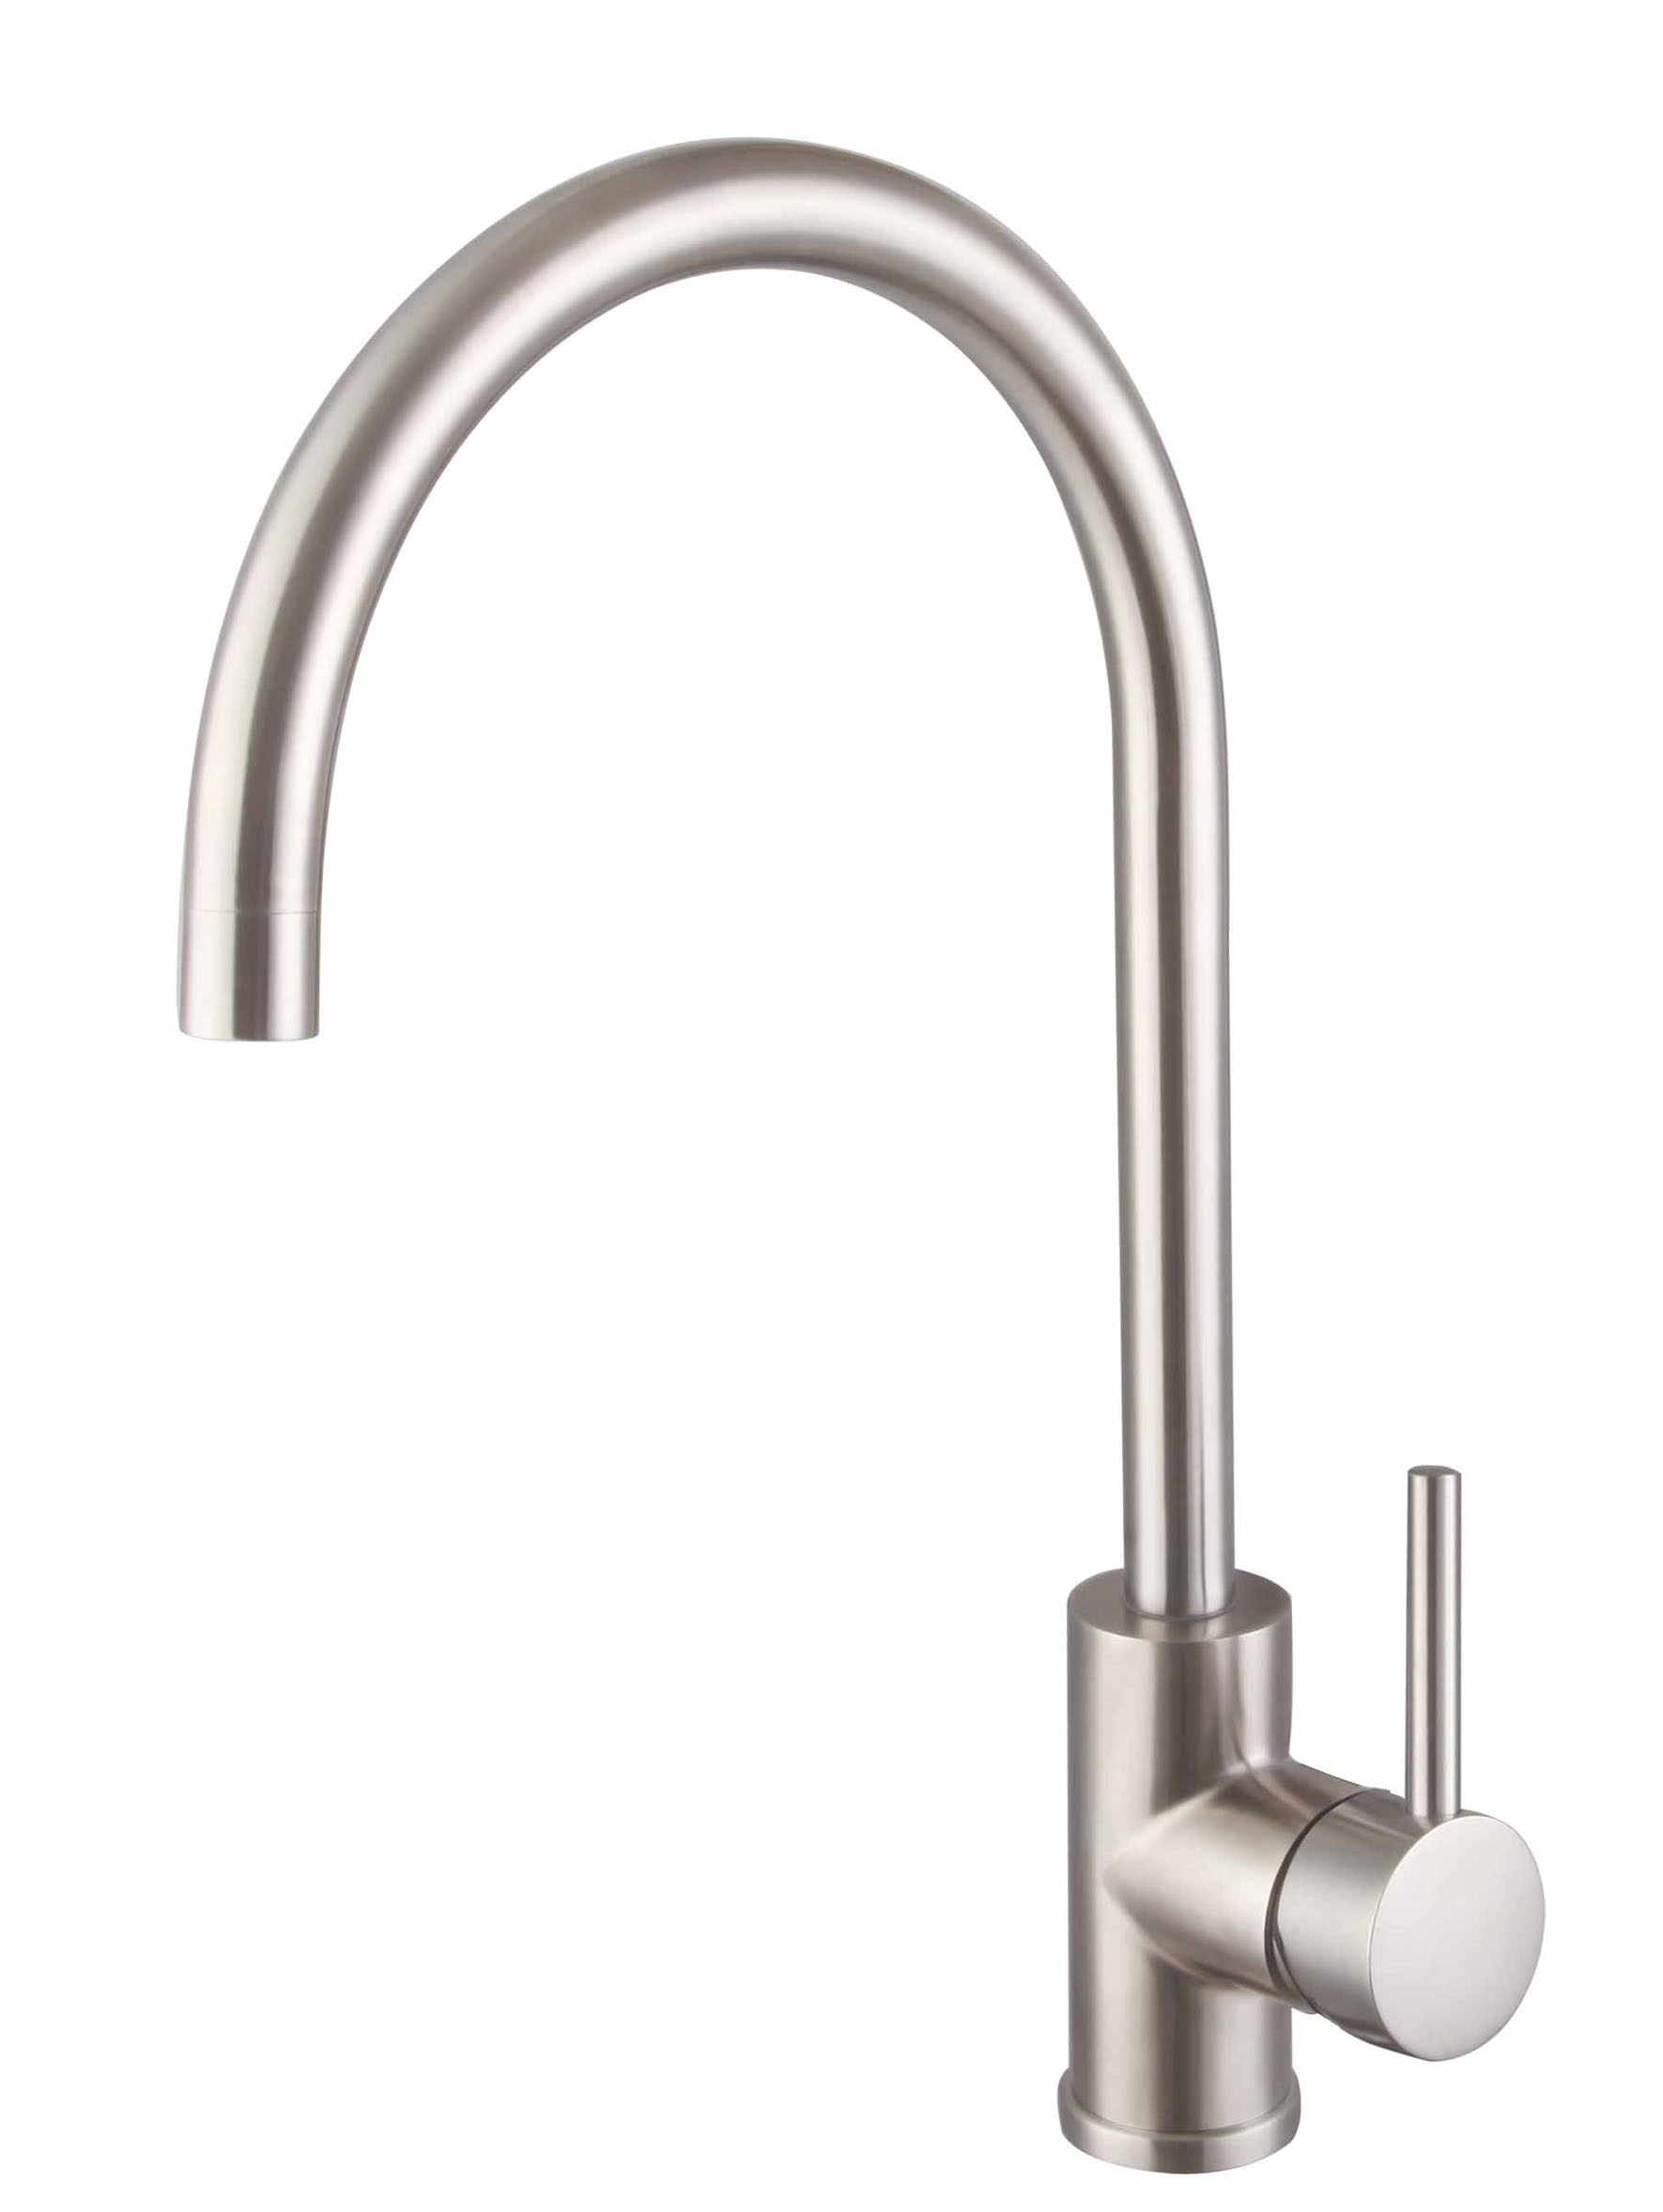 How To Buy Bathroom Faucet?